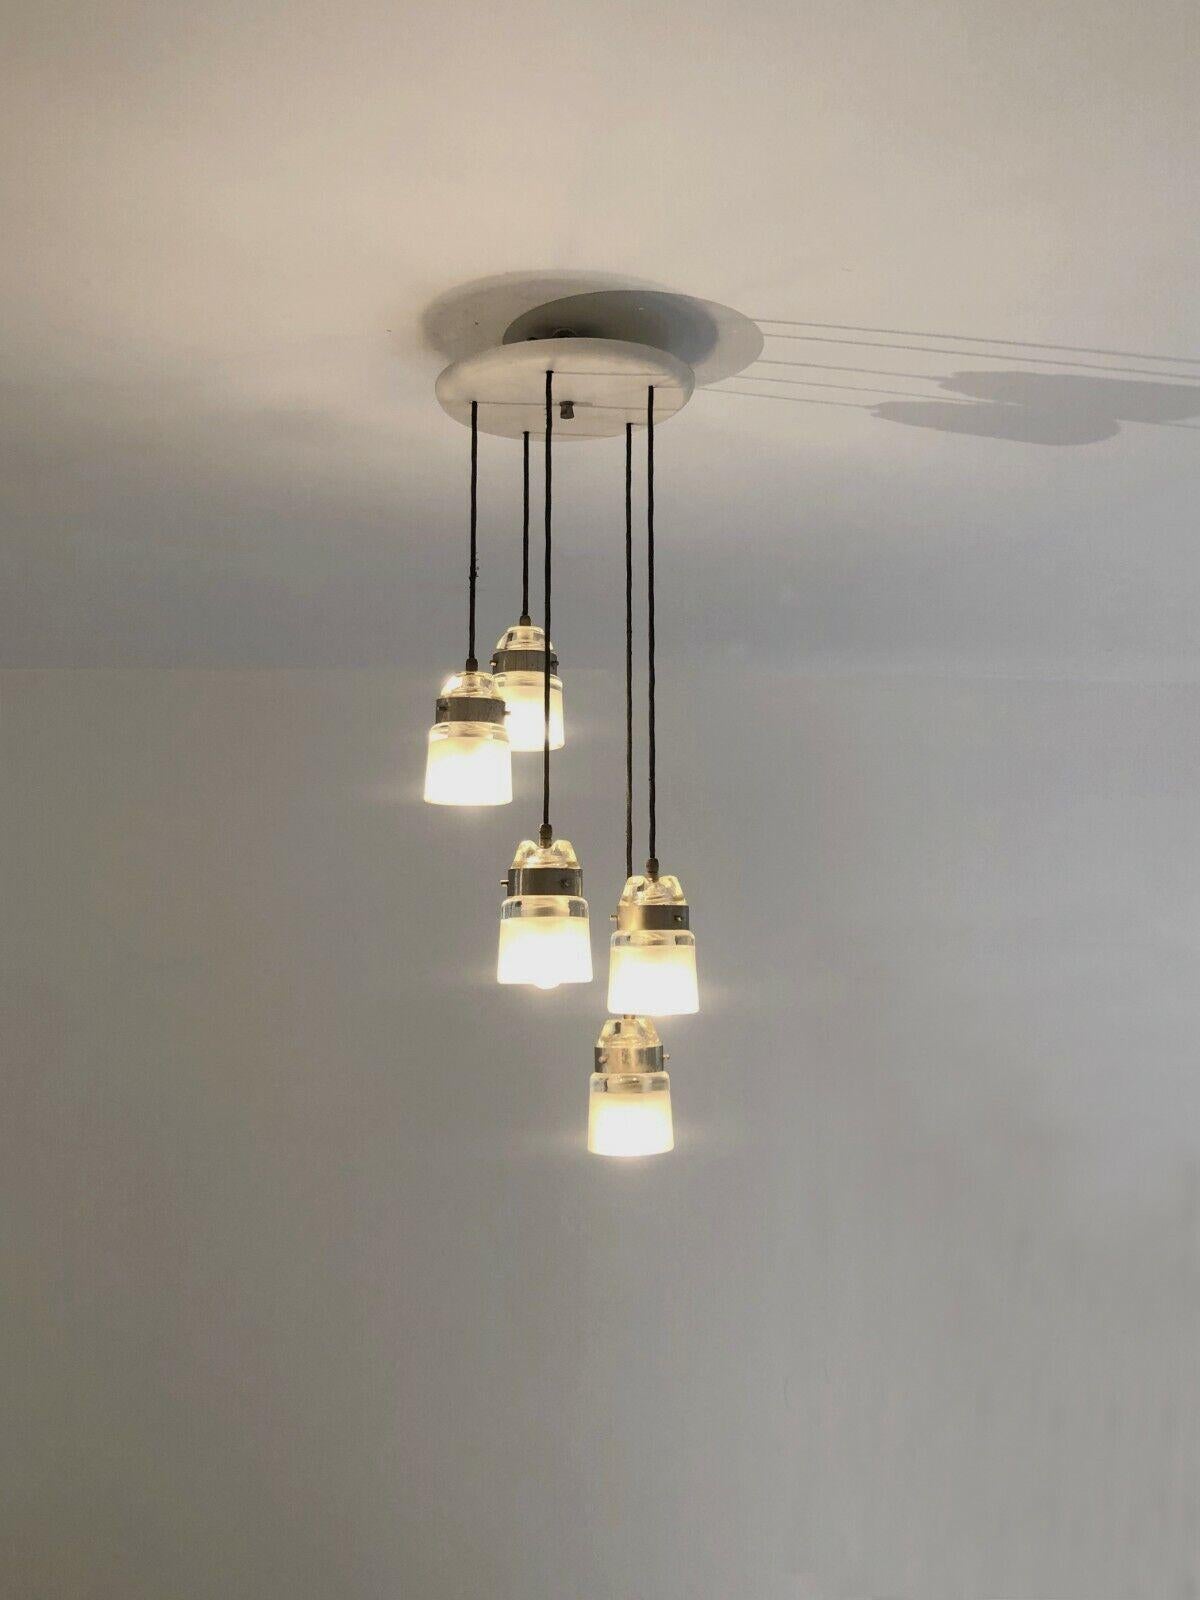 An elegant 5-light cascading suspension, Modernist, Minimalist, circular base in off-white lacquered metal, 5 suspensions forming a cascade of lights in black woven threads and thick sandblasted glass, to be attributed, Italy 1960.

The length of